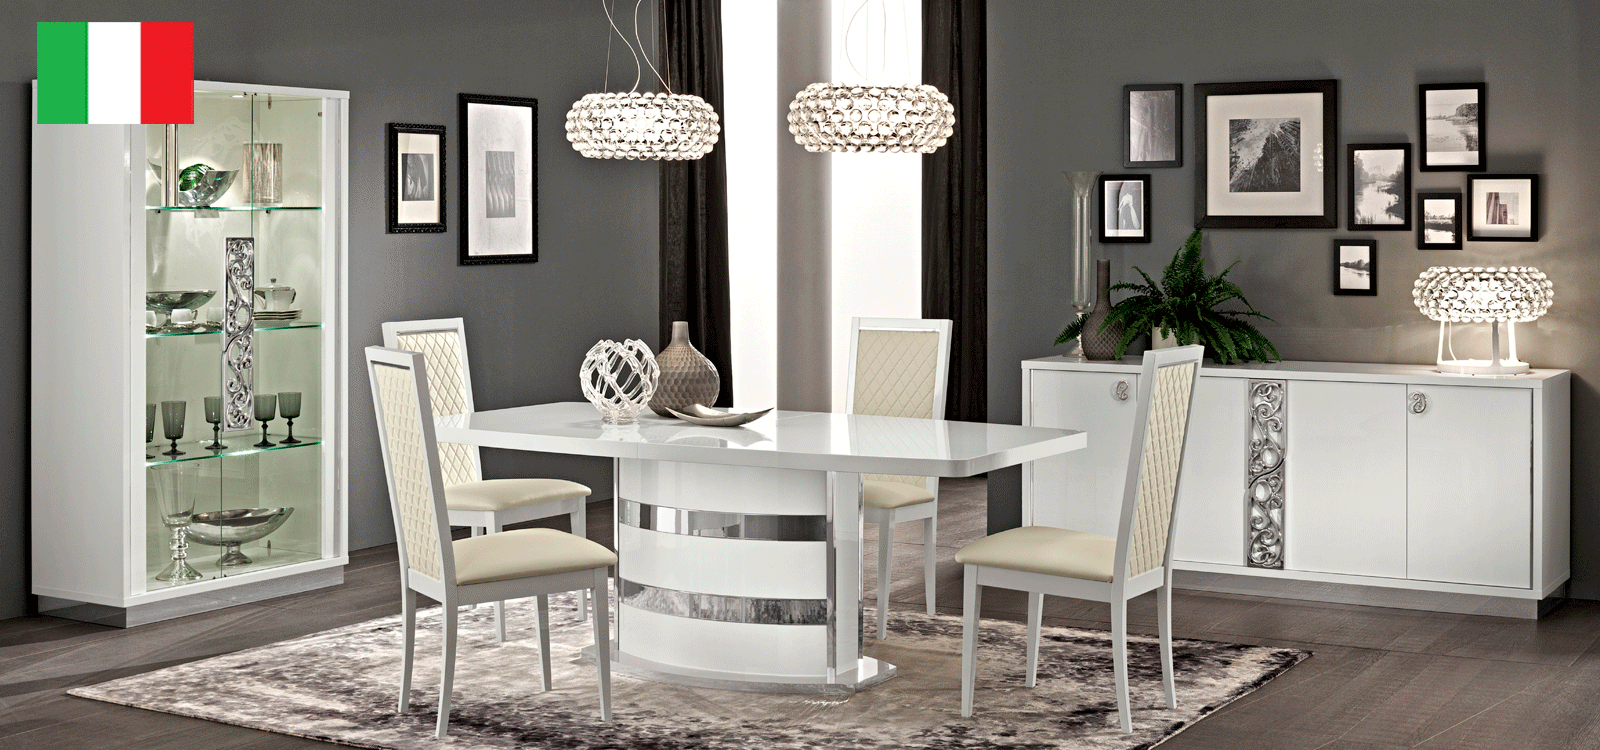 Dining Room Furniture Classic Dining Room Sets Roma Dining White, Italy